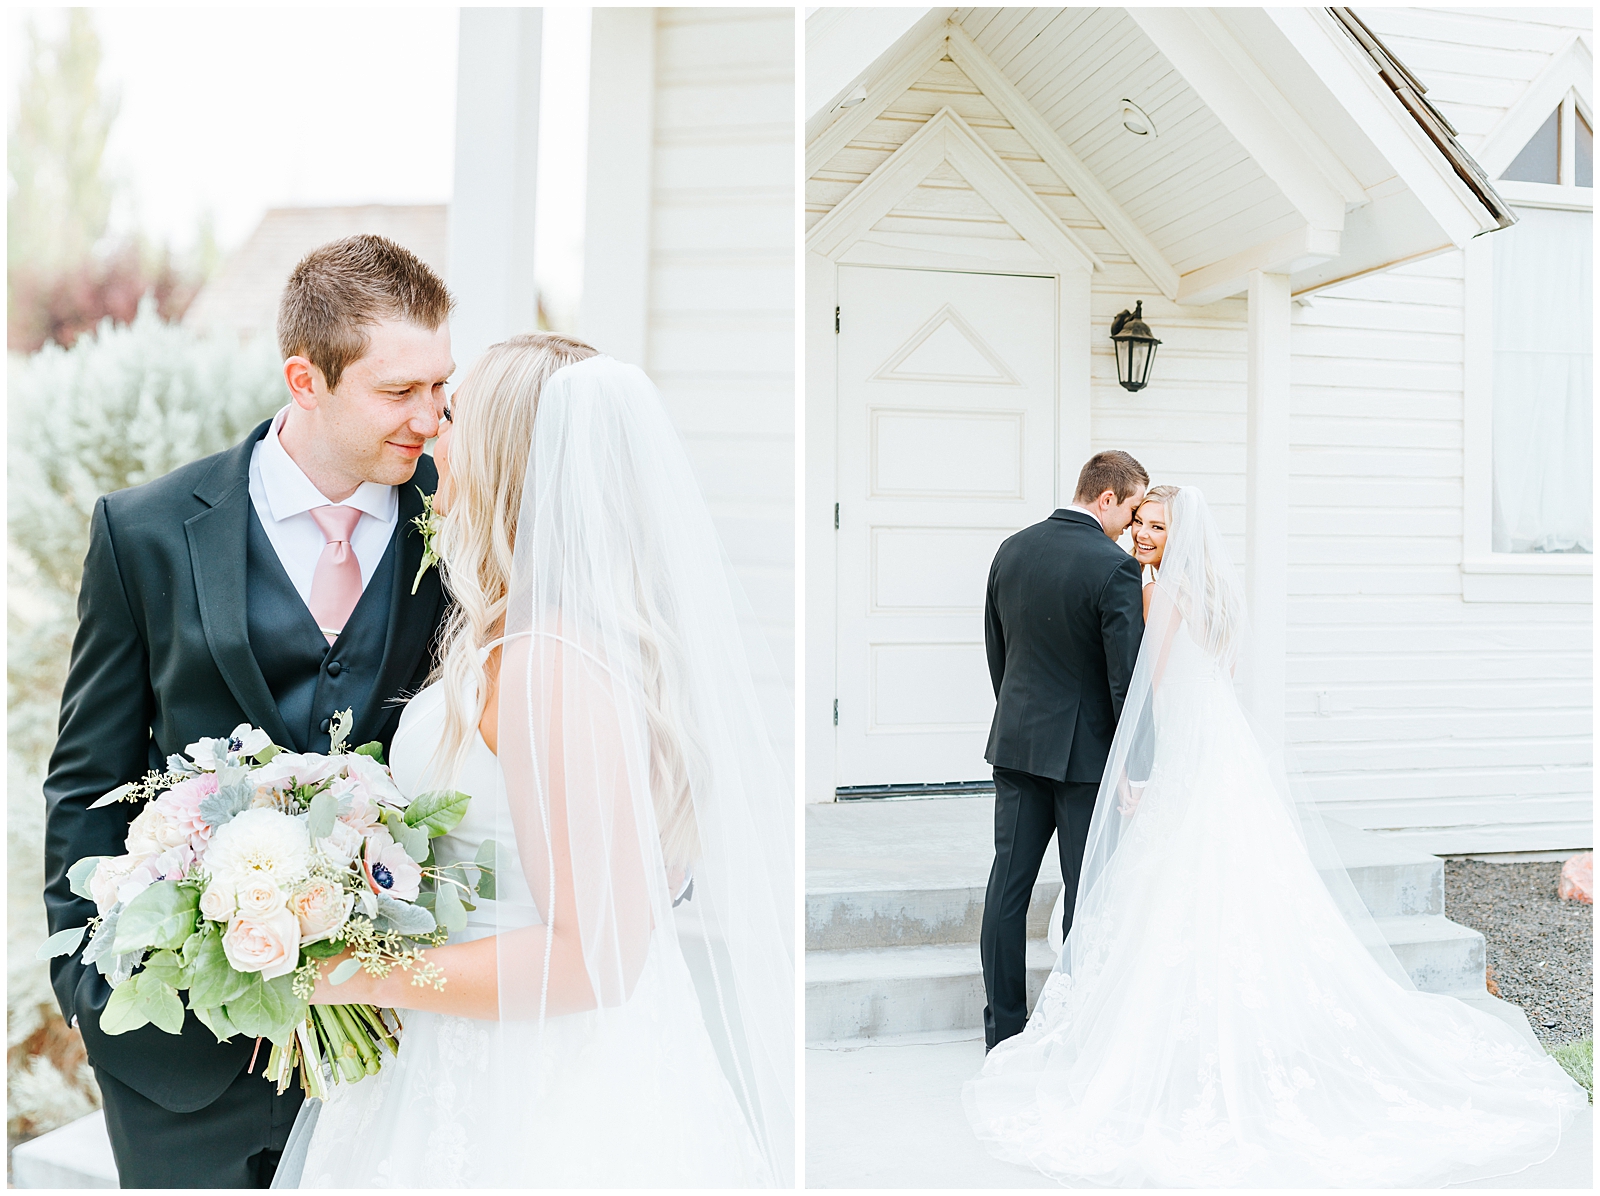 Bride and Groom Portraits at August Still Water Hollow Wedding 